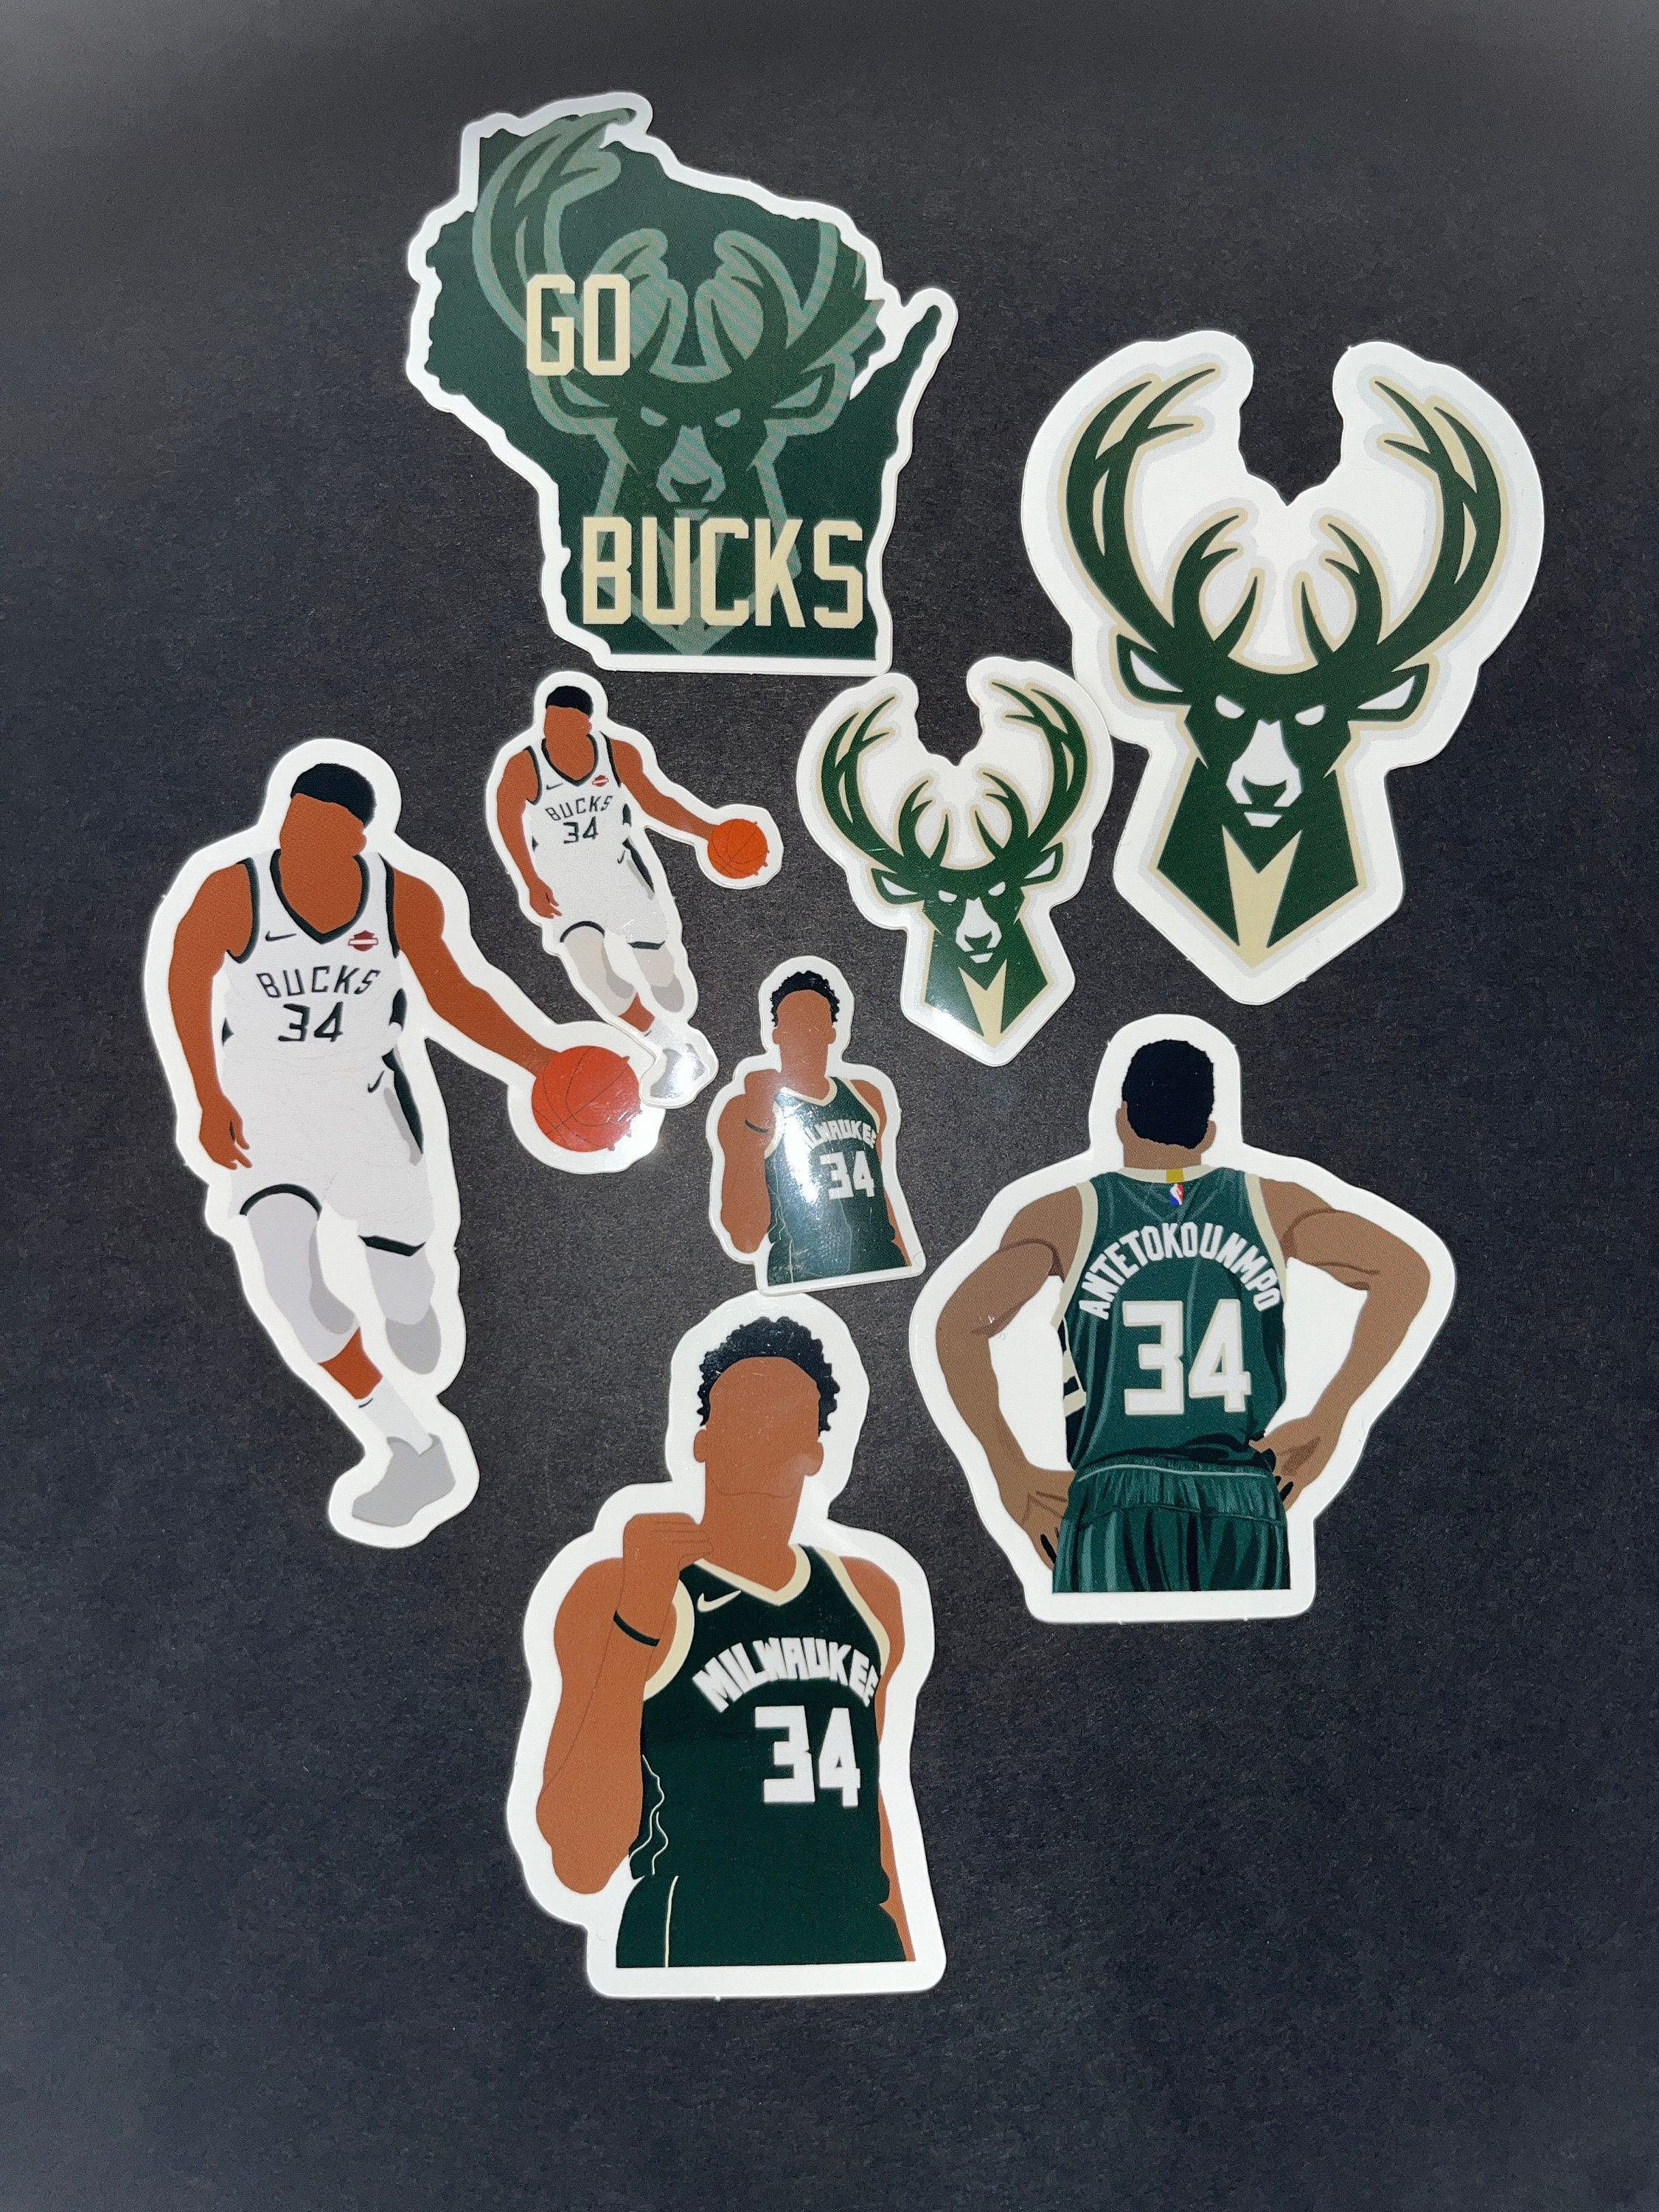 Milwaukee Bucks: Giannis Antetokounmpo 2021 Black Jersey - NBA Removable Wall Adhesive Wall Decal Giant Athlete +2 Wall Decals 27W x 50H